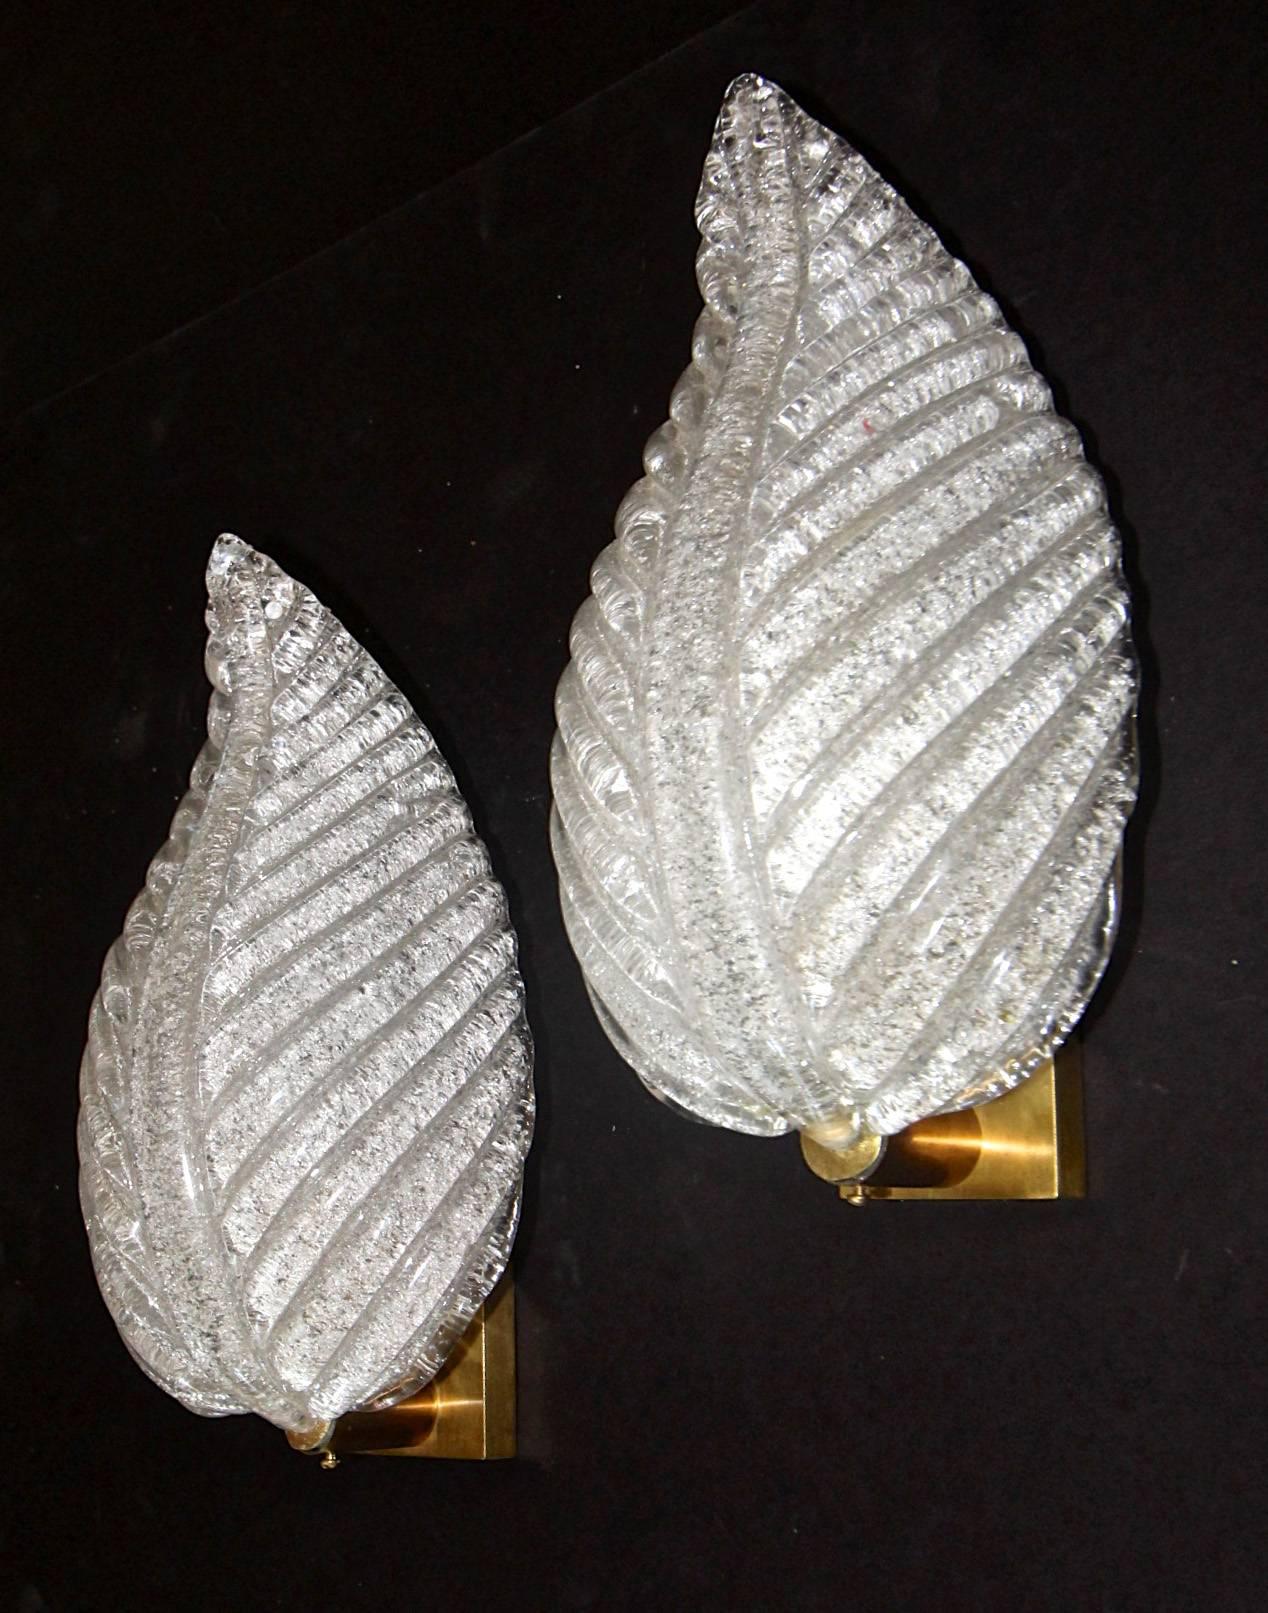 Pair of beautiful handblown Barovier glass leaf wall sconces, supported on brass backplates. Reverse side of the leaf in the 